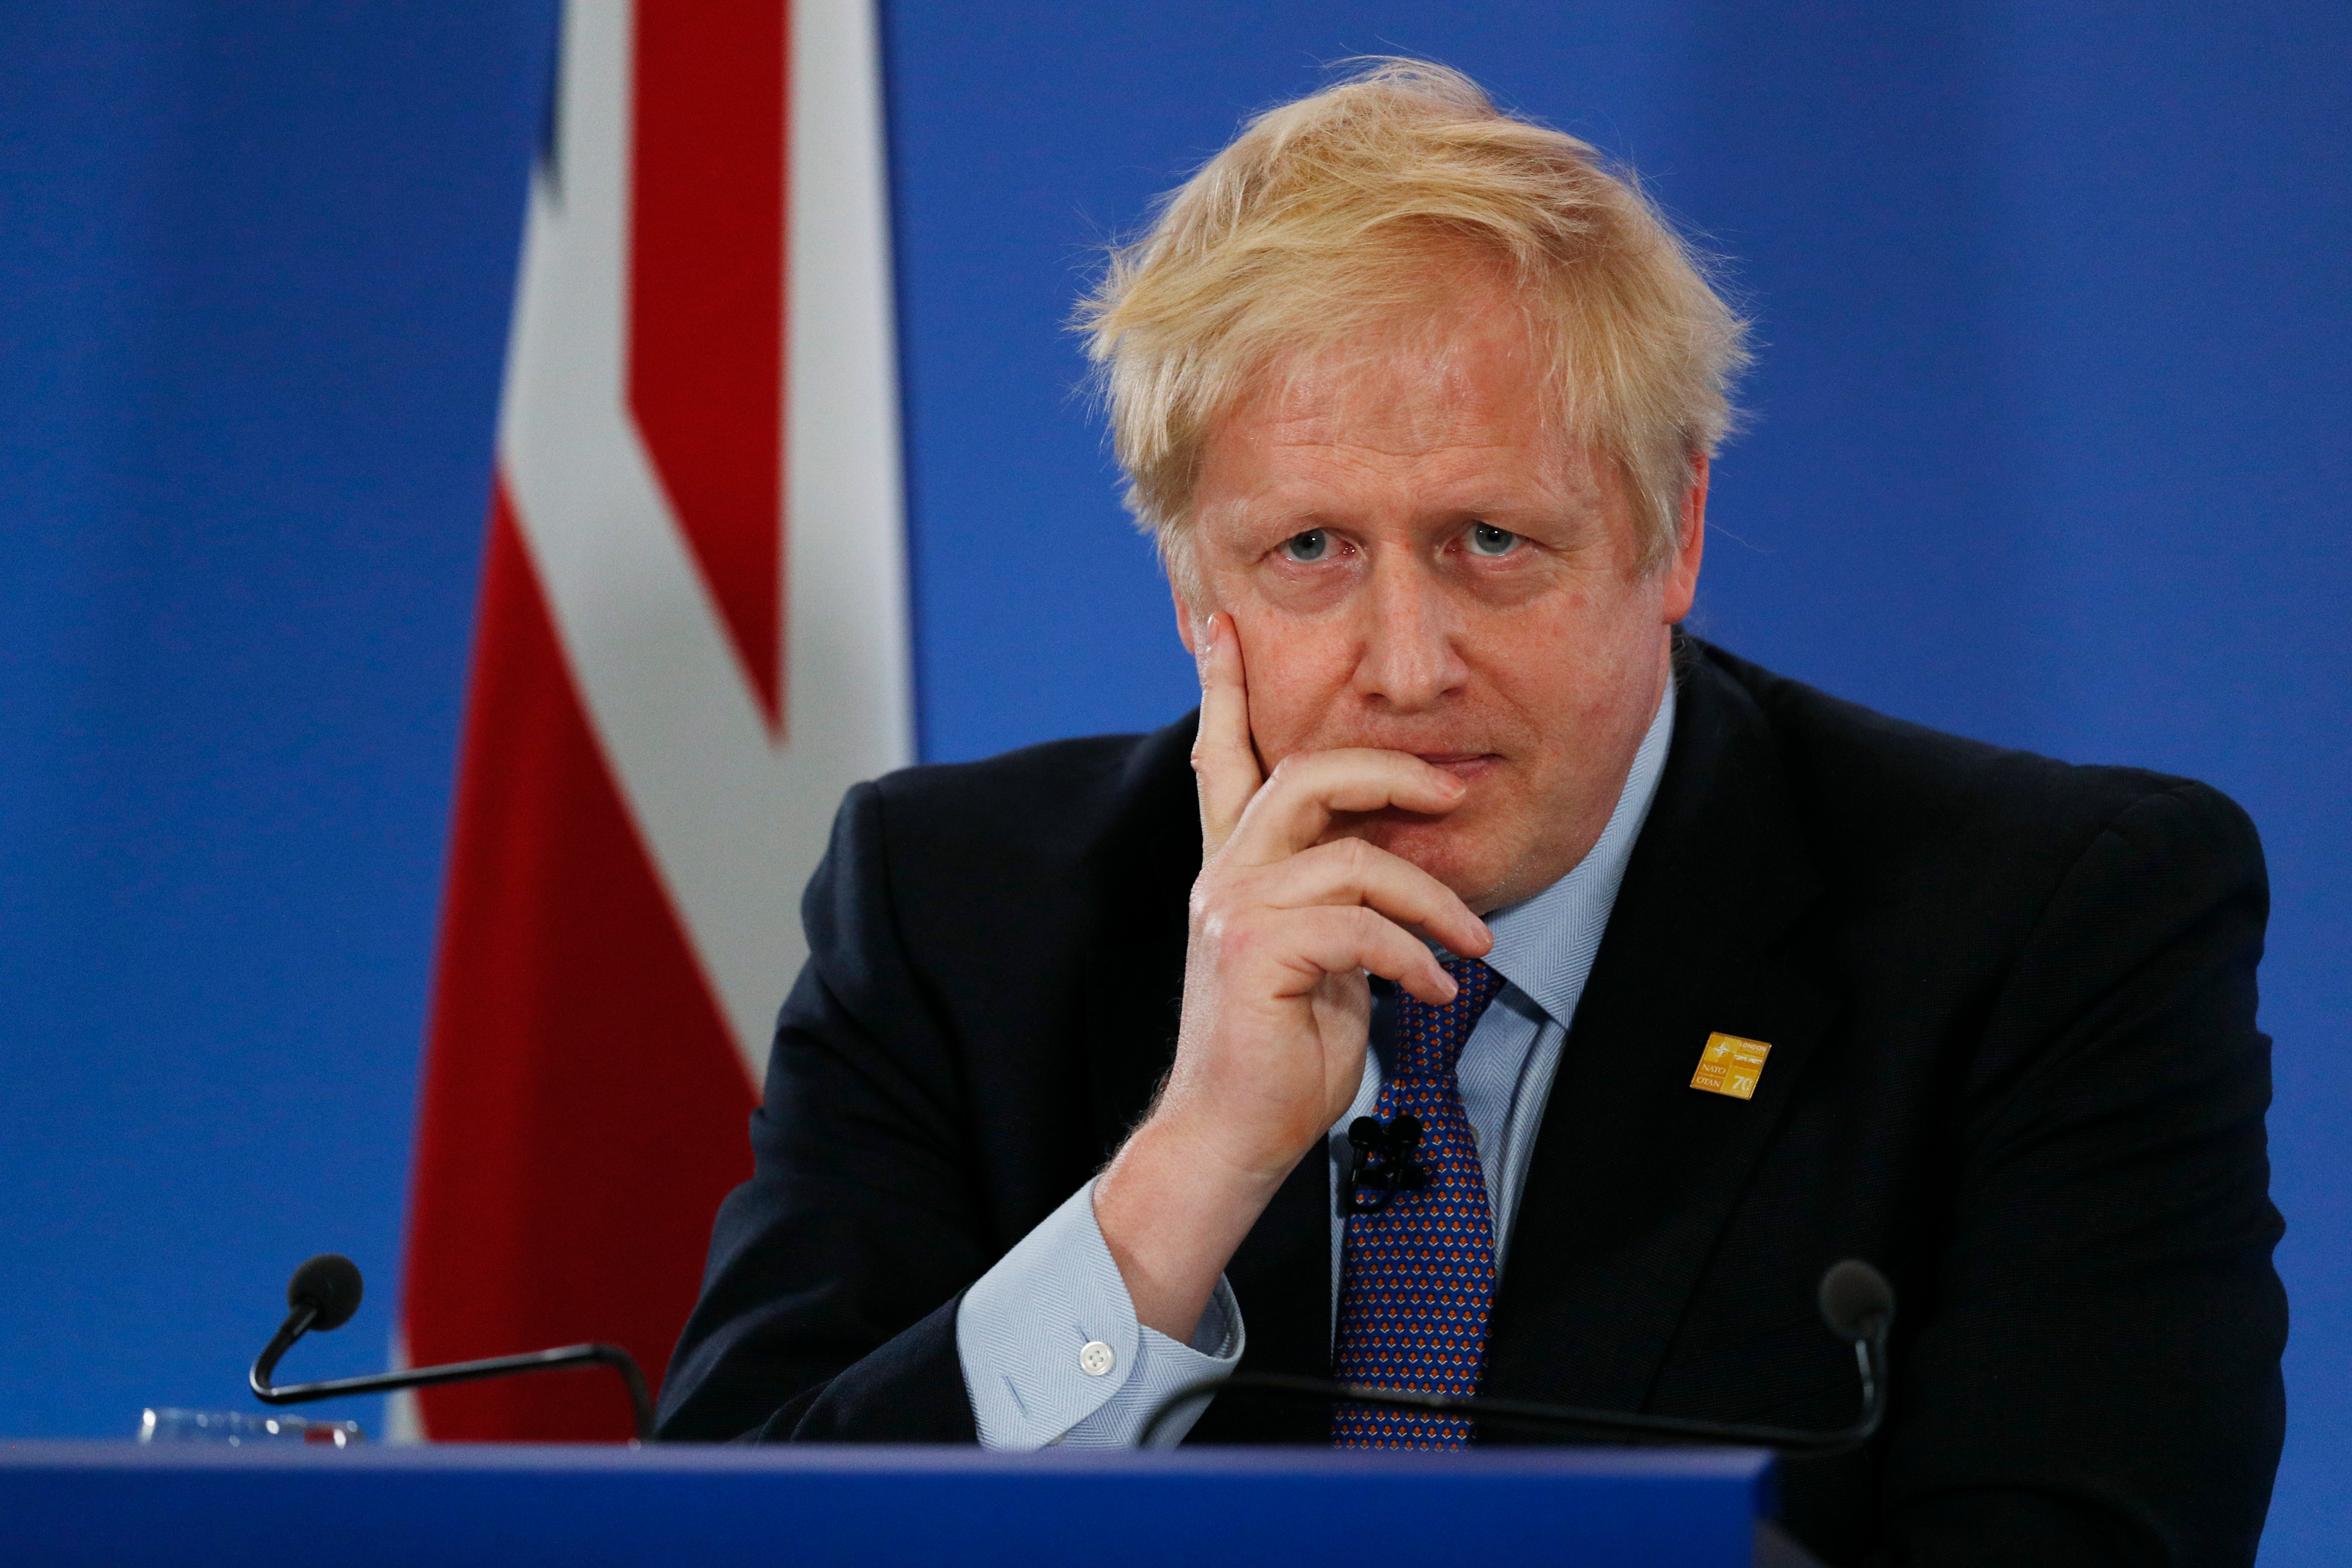 Boris Johnson said the UK had to be ‘realistic’ about whether a military solution was possible